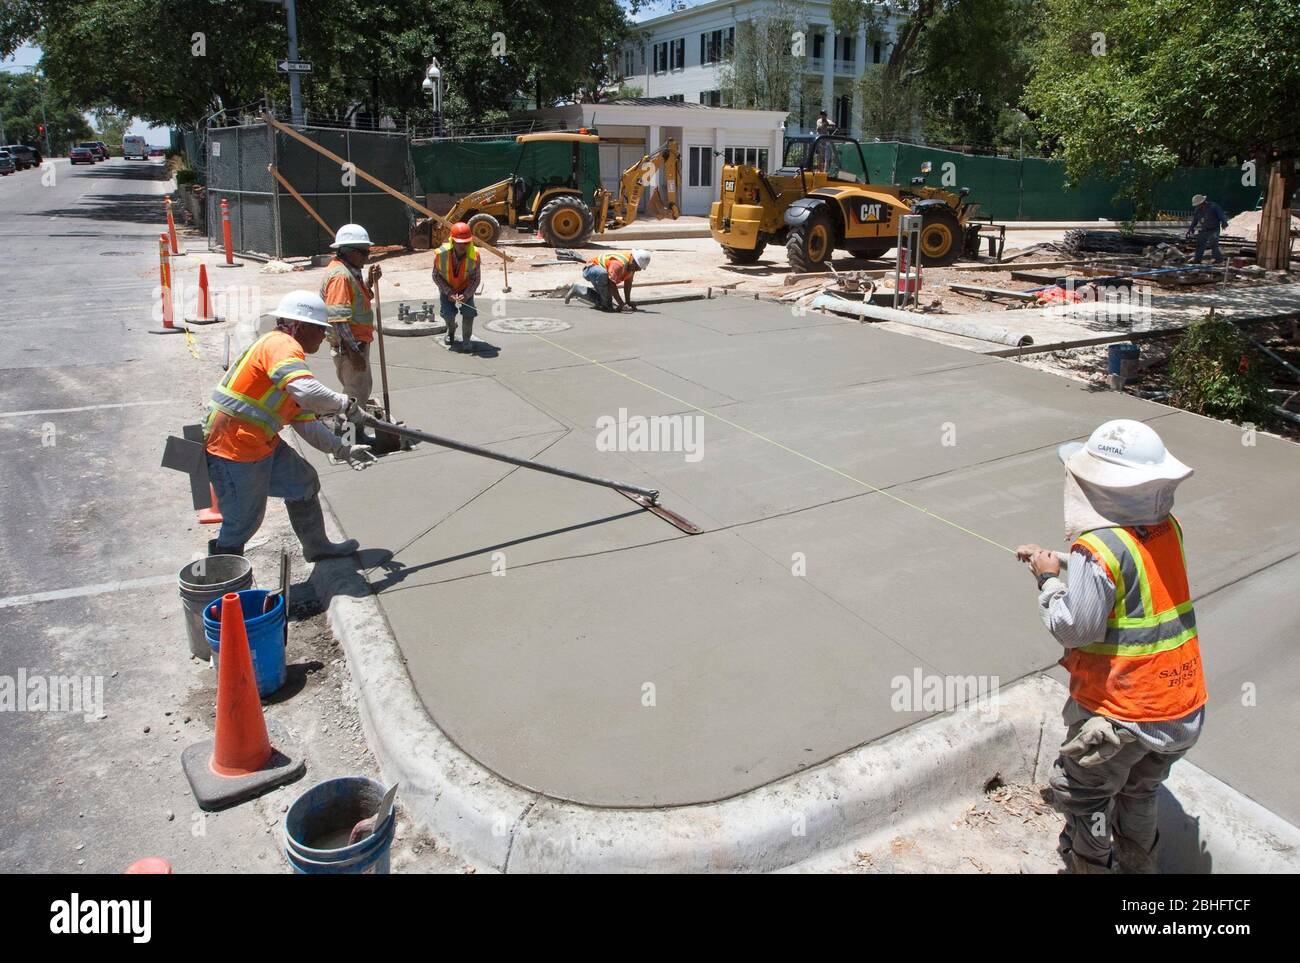 Austin Texas USA, 2012: Group of mostly Hispanic male workers complete concrete sidewalk in front of Texas Governor's Mansion in downtown Austin.  ©Marjorie Kamys Cotera/Daemmrich Photography Stock Photo